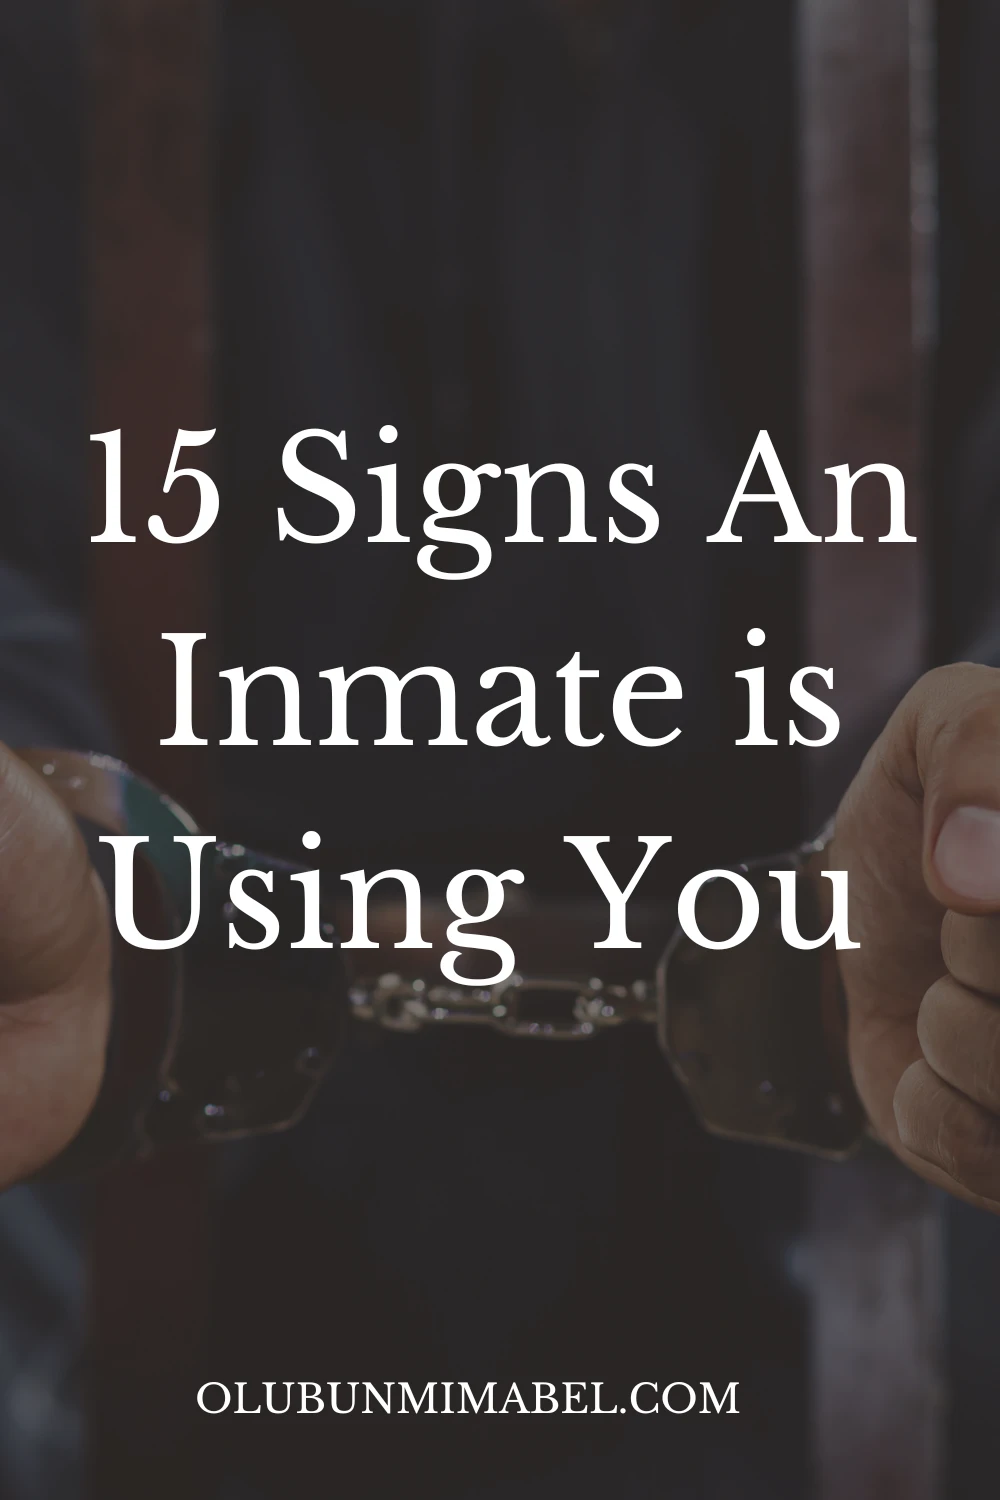 Signs An Inmate is Using You